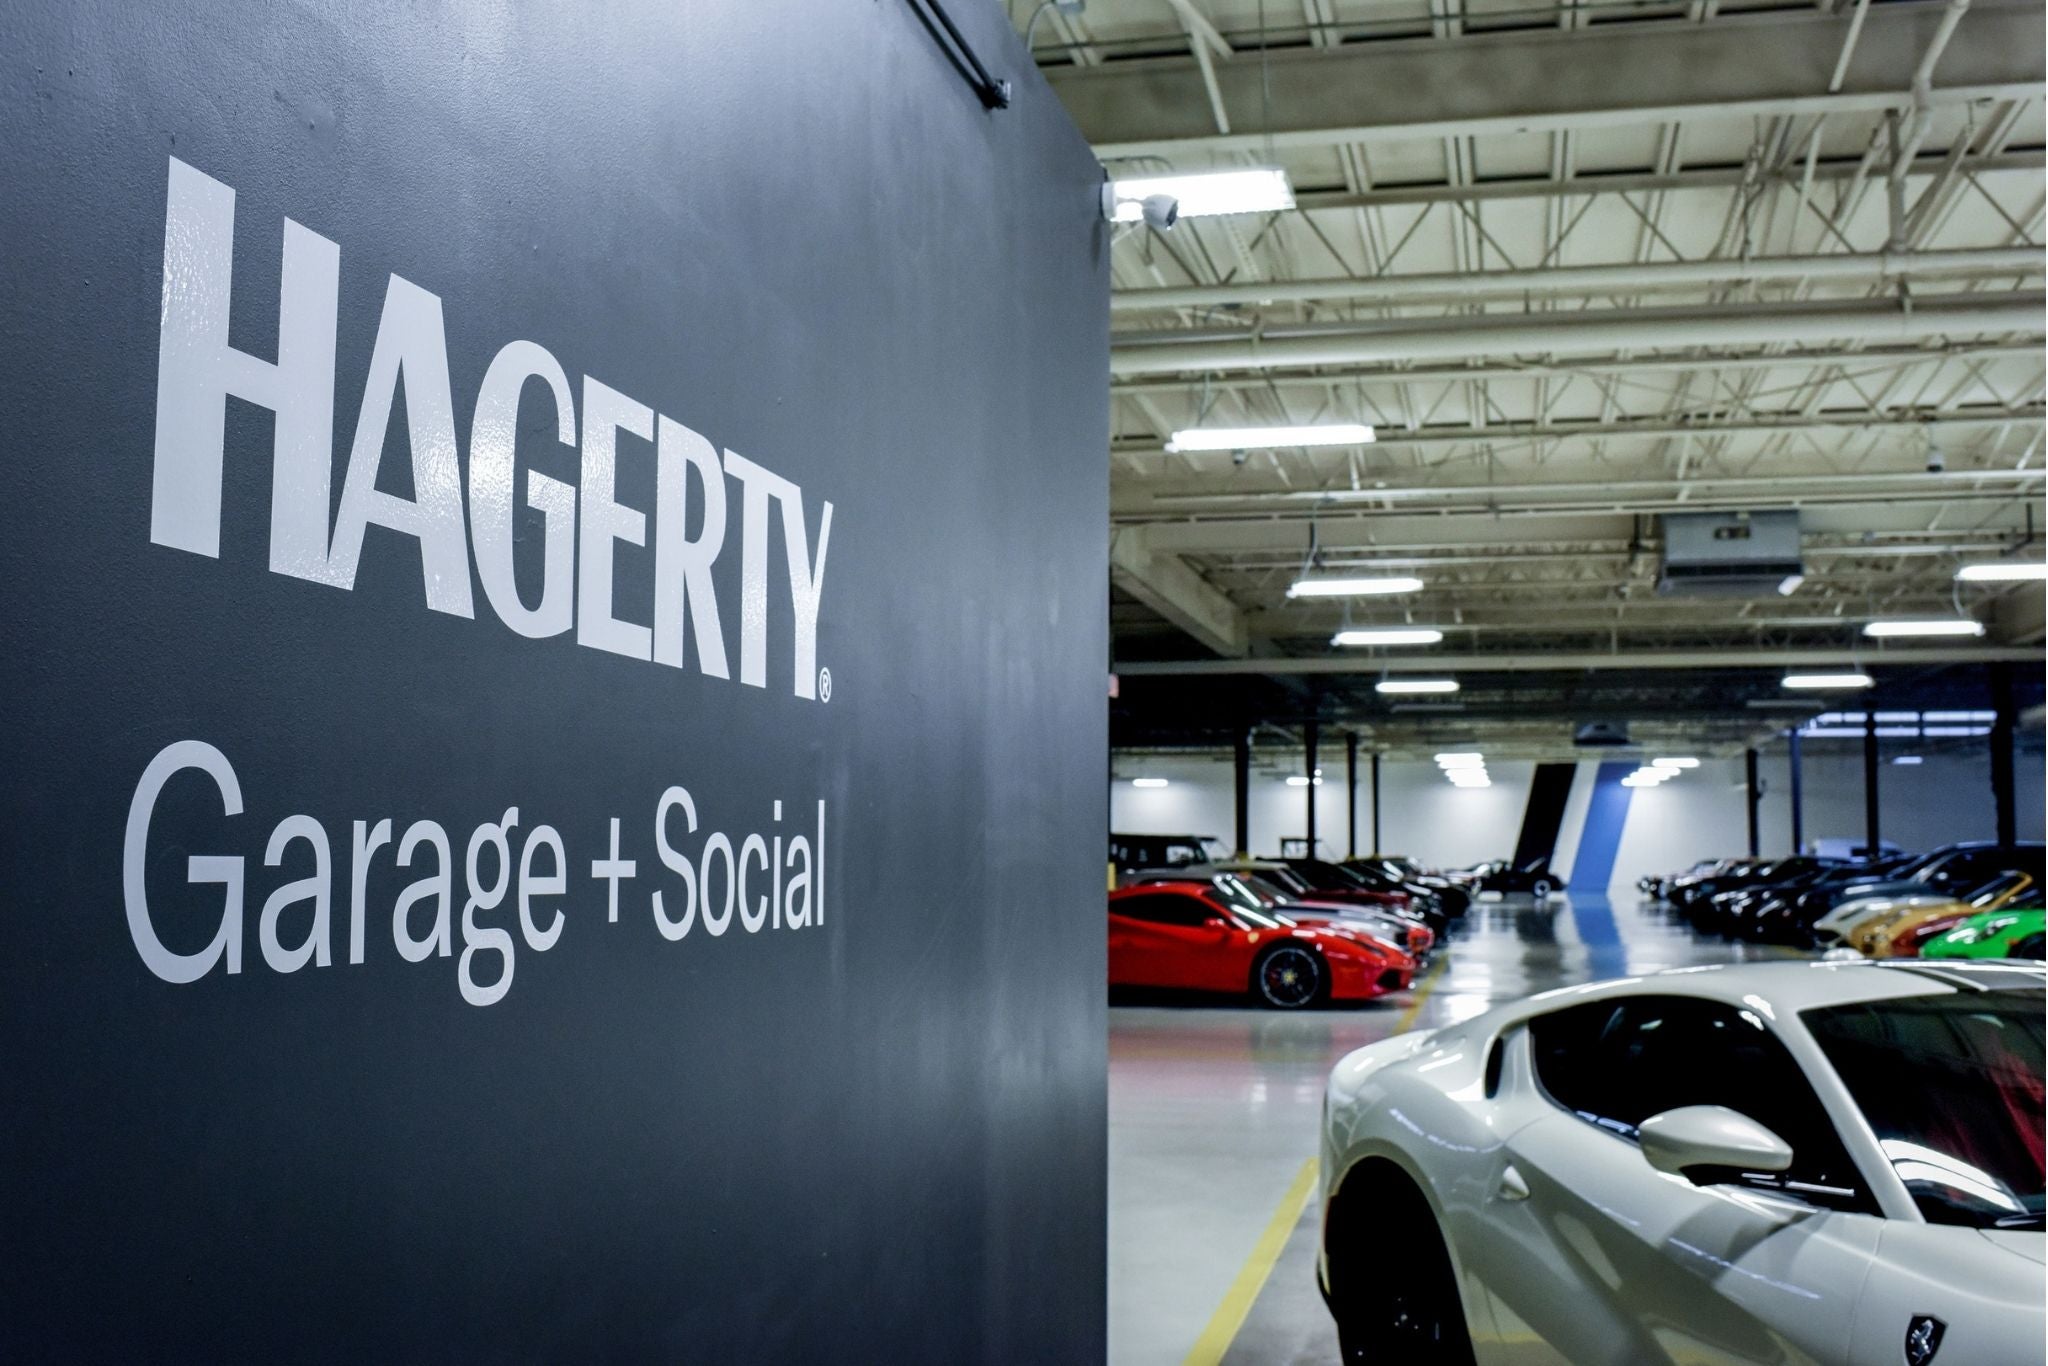 Hagerty CEO McKeel Hagerty aims to save car culture in rapidly